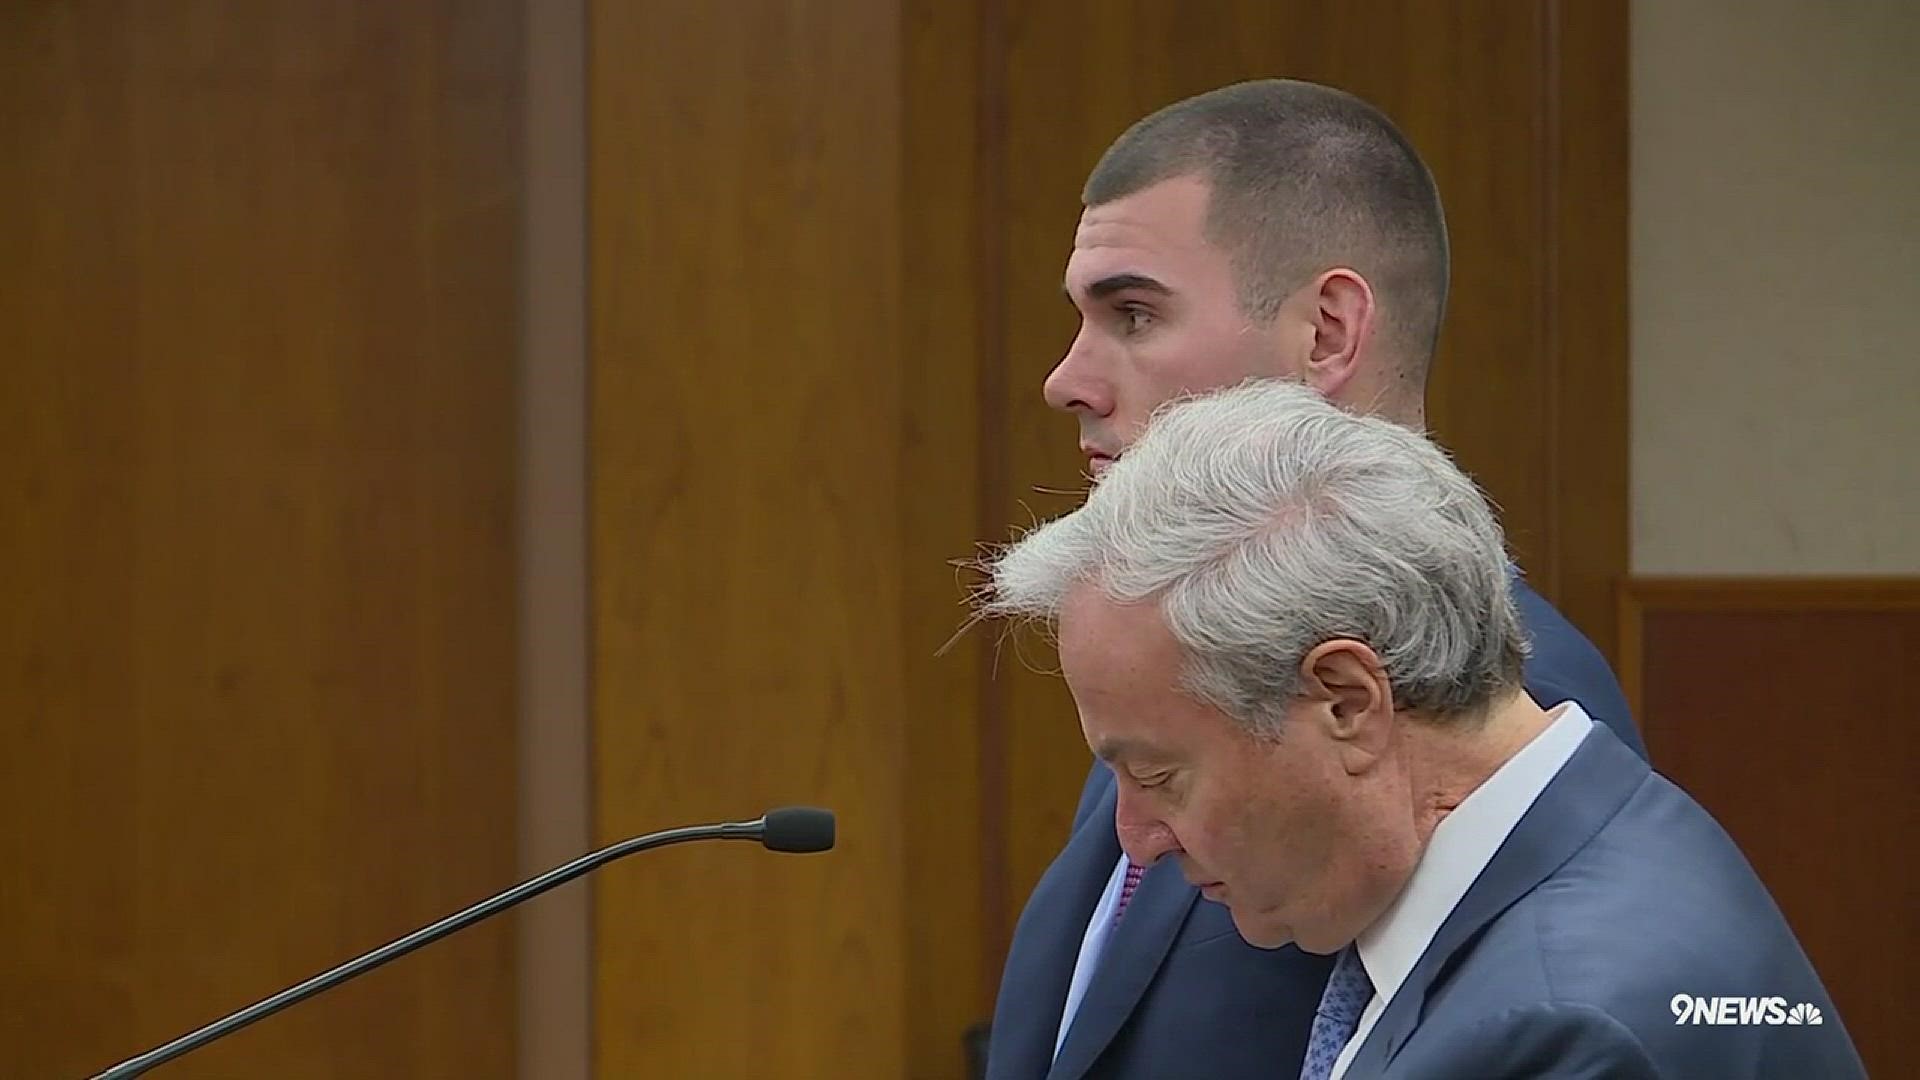 Former Broncos backup quarterback Chad Kelly briefly appeared in court Wednesday morning following his arrest Tuesday morning for first-degree criminal trespass. Kelly was released from the team on Wednesday morning.